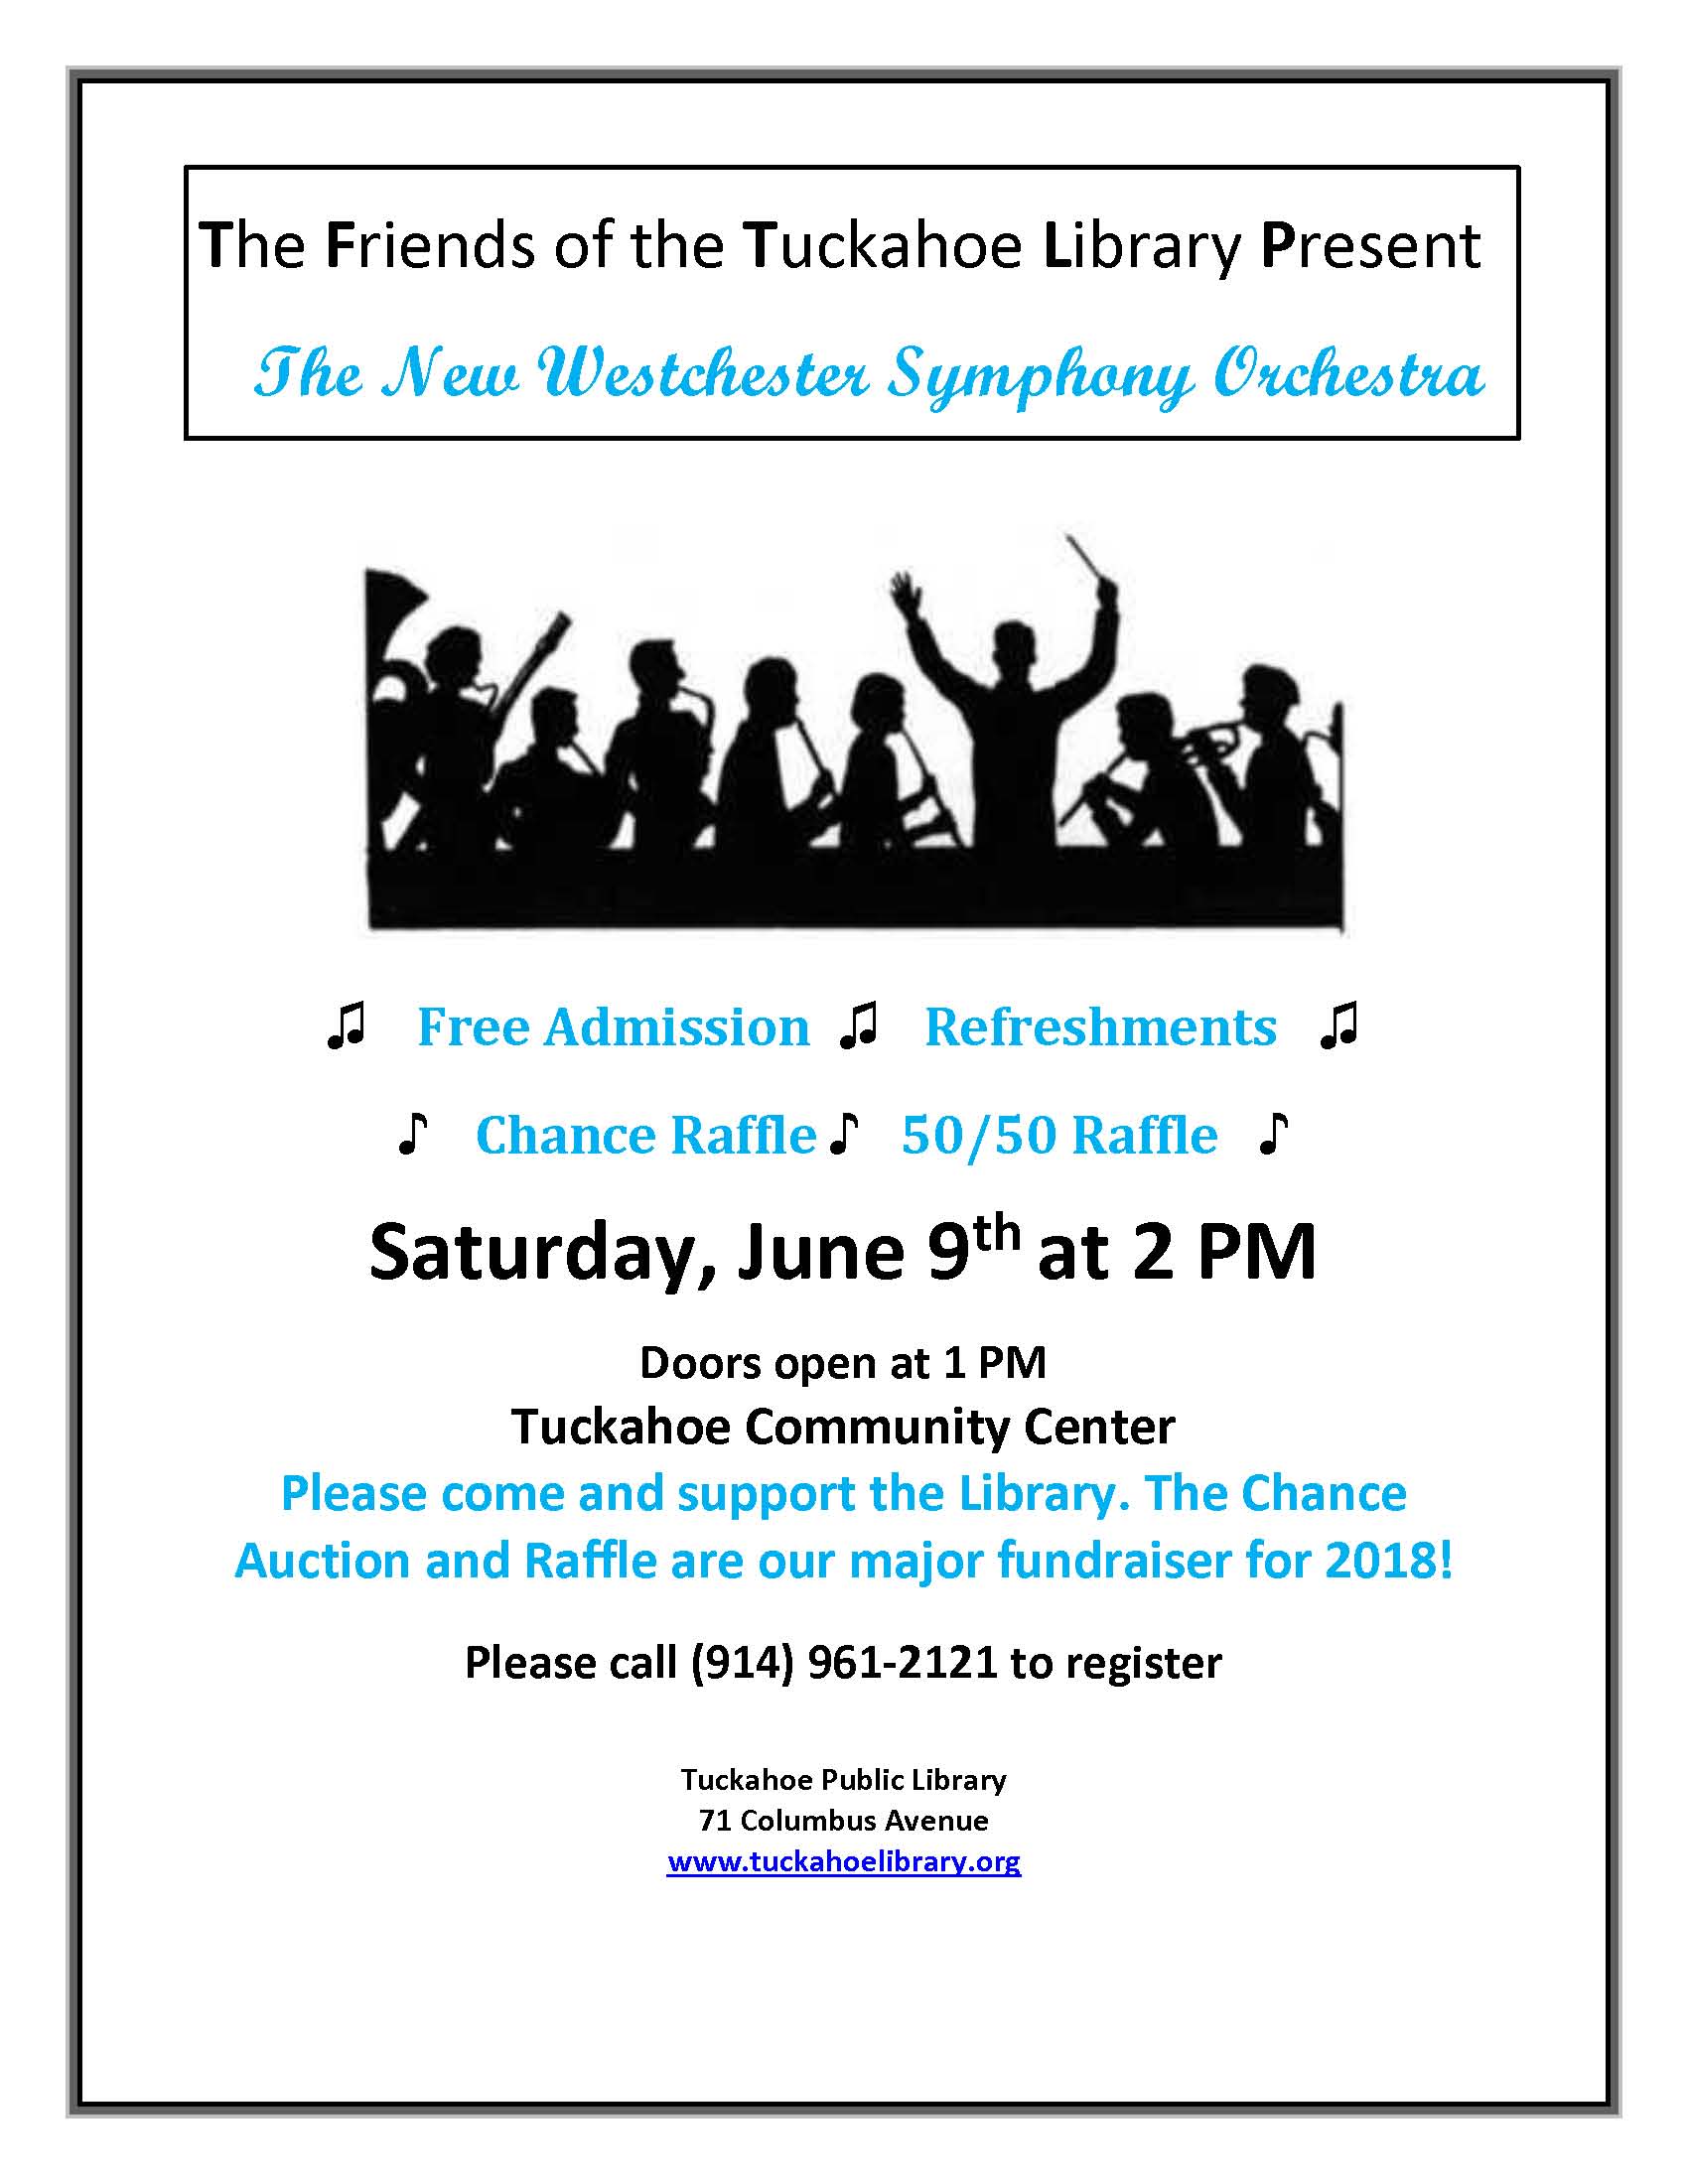 Tuckahoe Library westchester symphony orchestra FLYER 2018